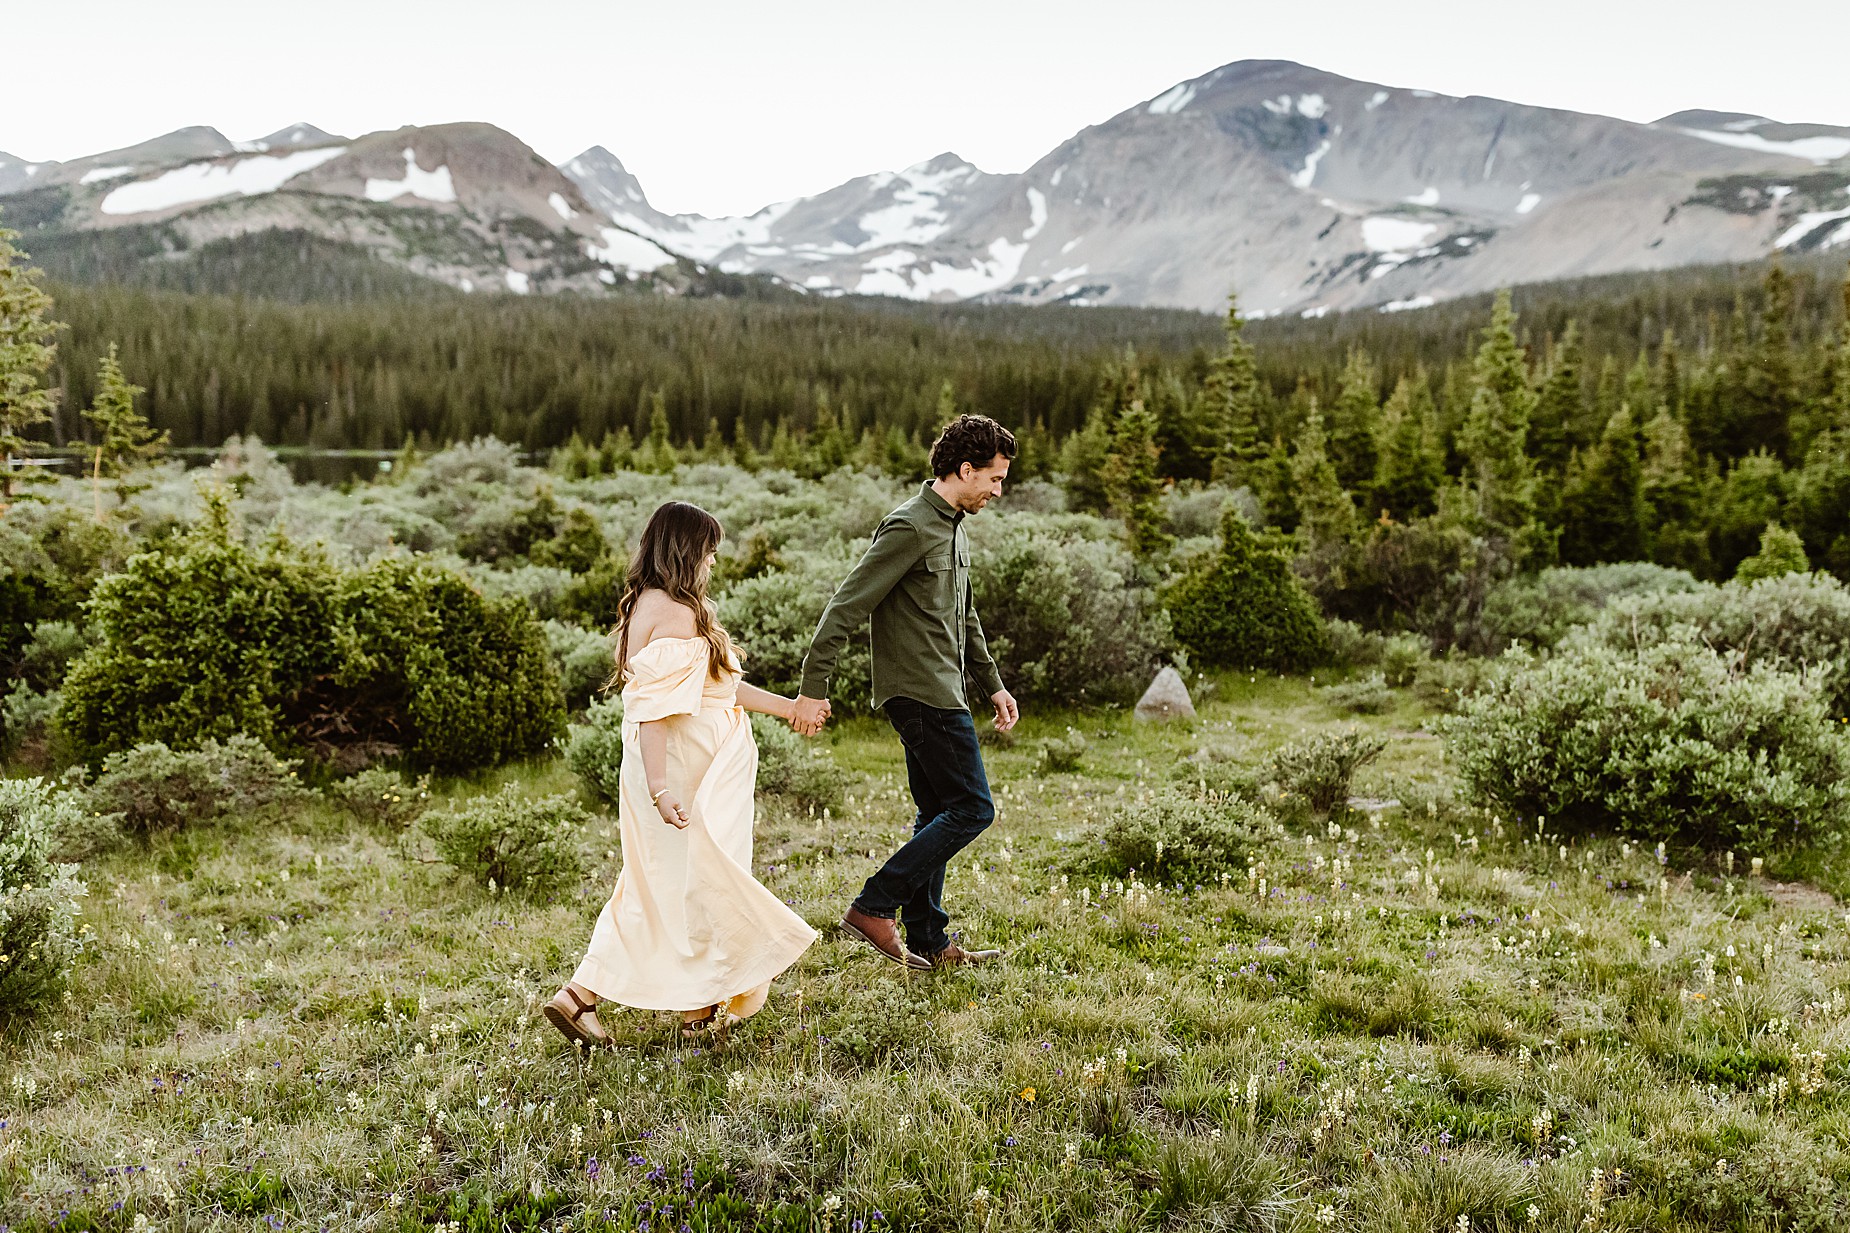 Couple takes anniversary photos in the Rocky Mountains in front of gorgeous alpine lake surrounded by greenery and wildflowers